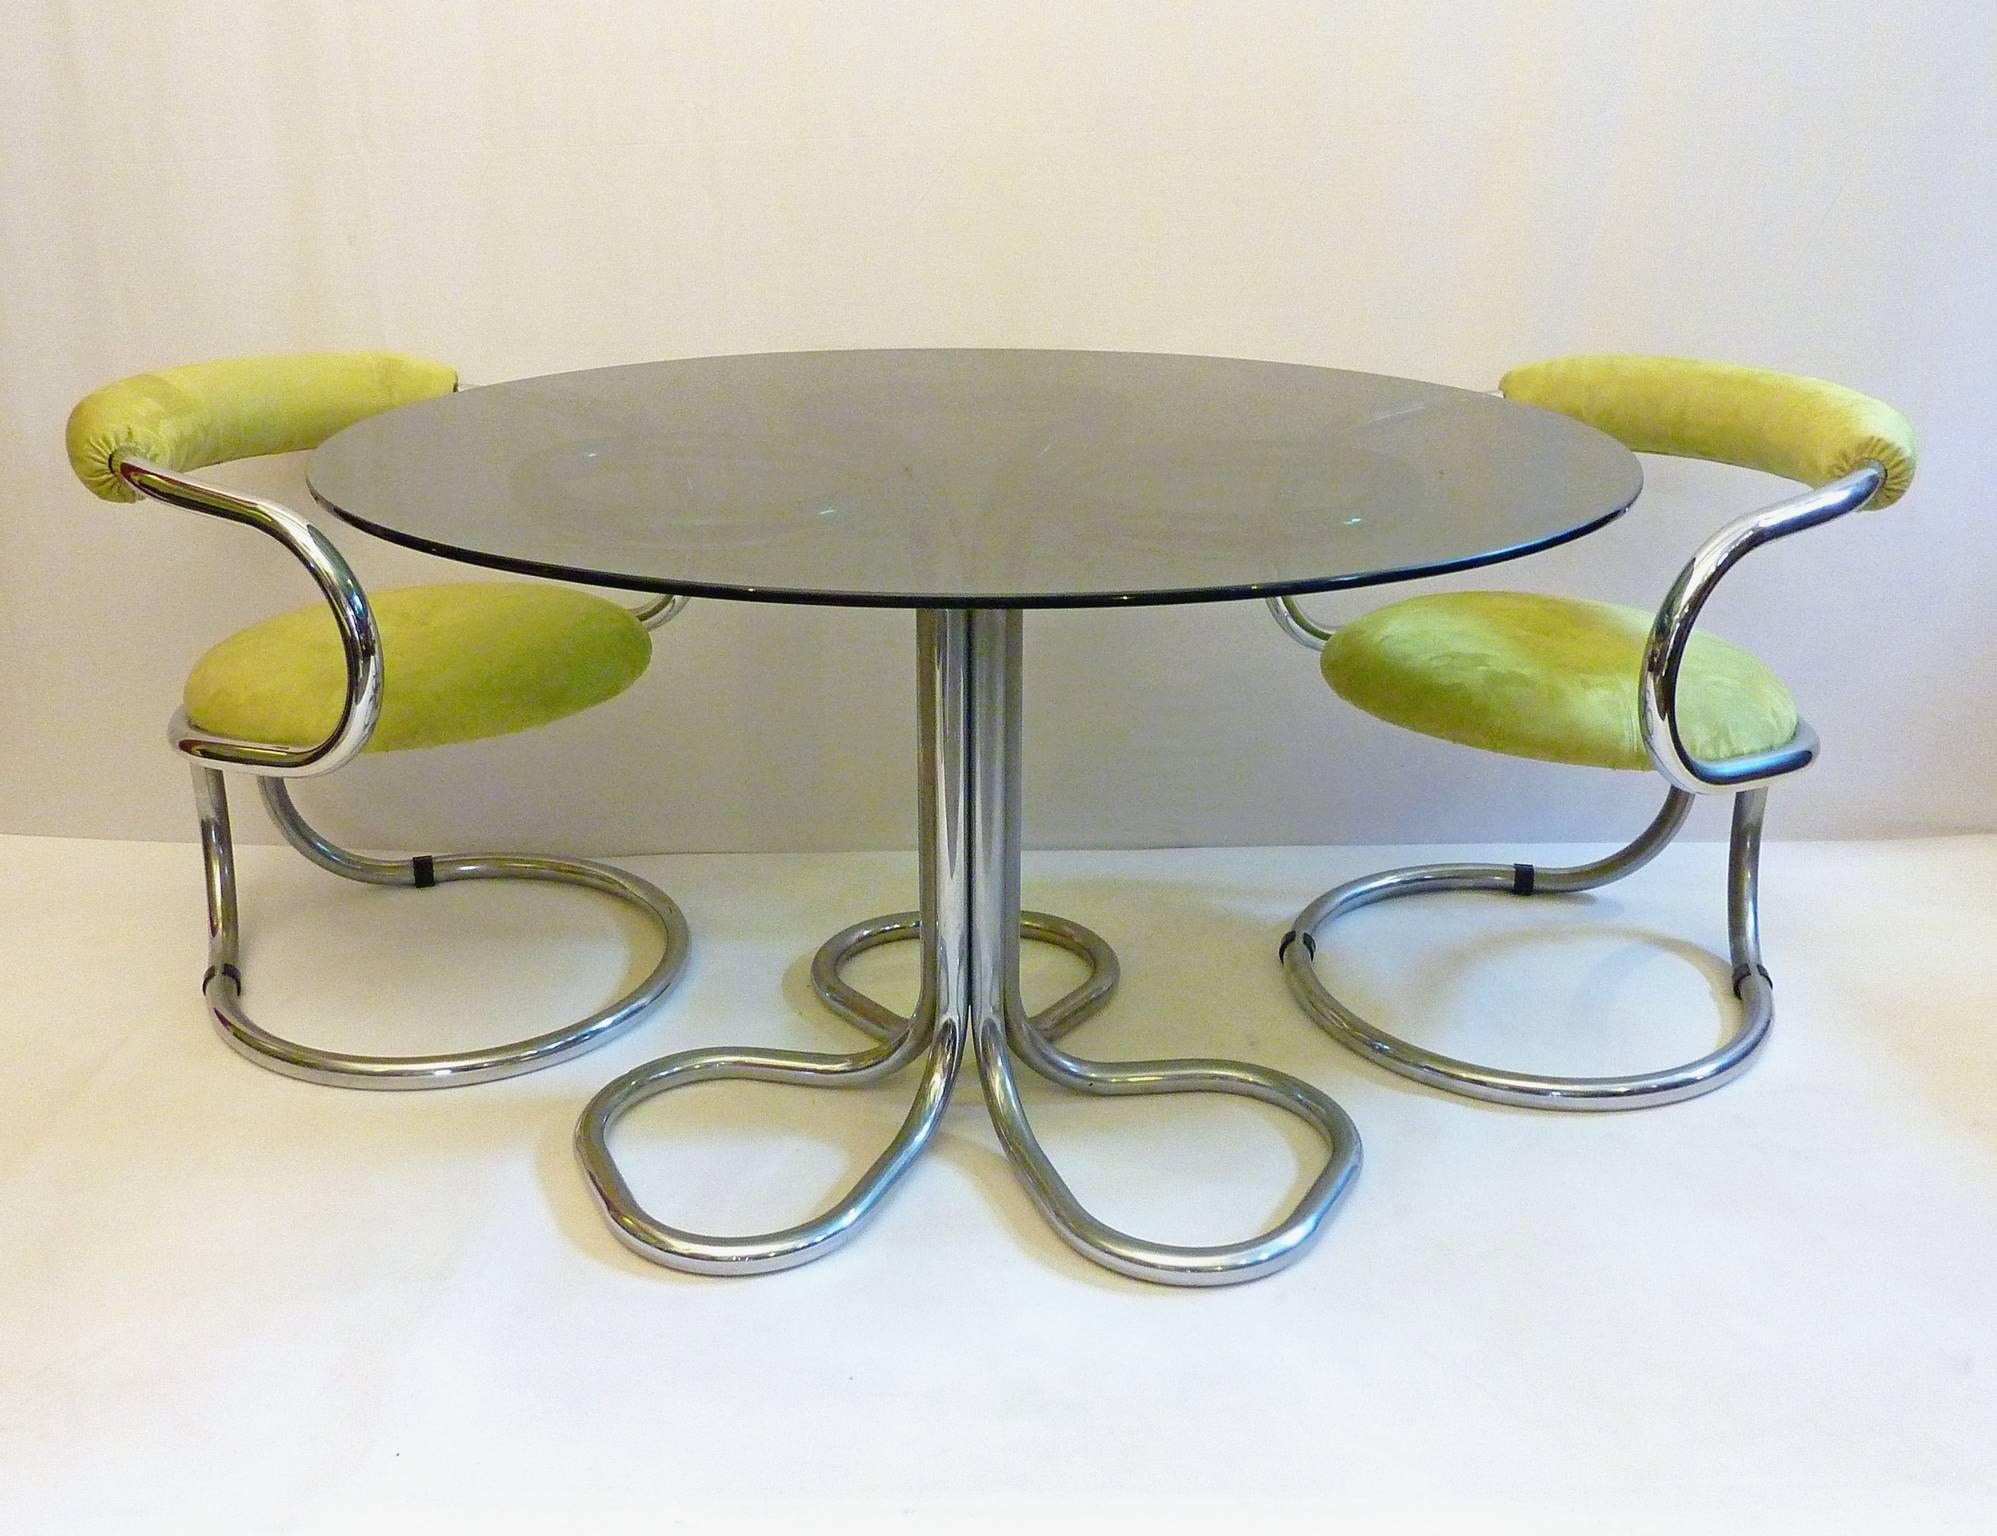 Cool dining room set with a round table with a smoke colored glass top and four chairs. Recently professionally reupholstered chairs in lime green faux suede in the original manner. 
Size: Chair H.72 / L.60 / W.60 / Seat height. 48
Size: Table